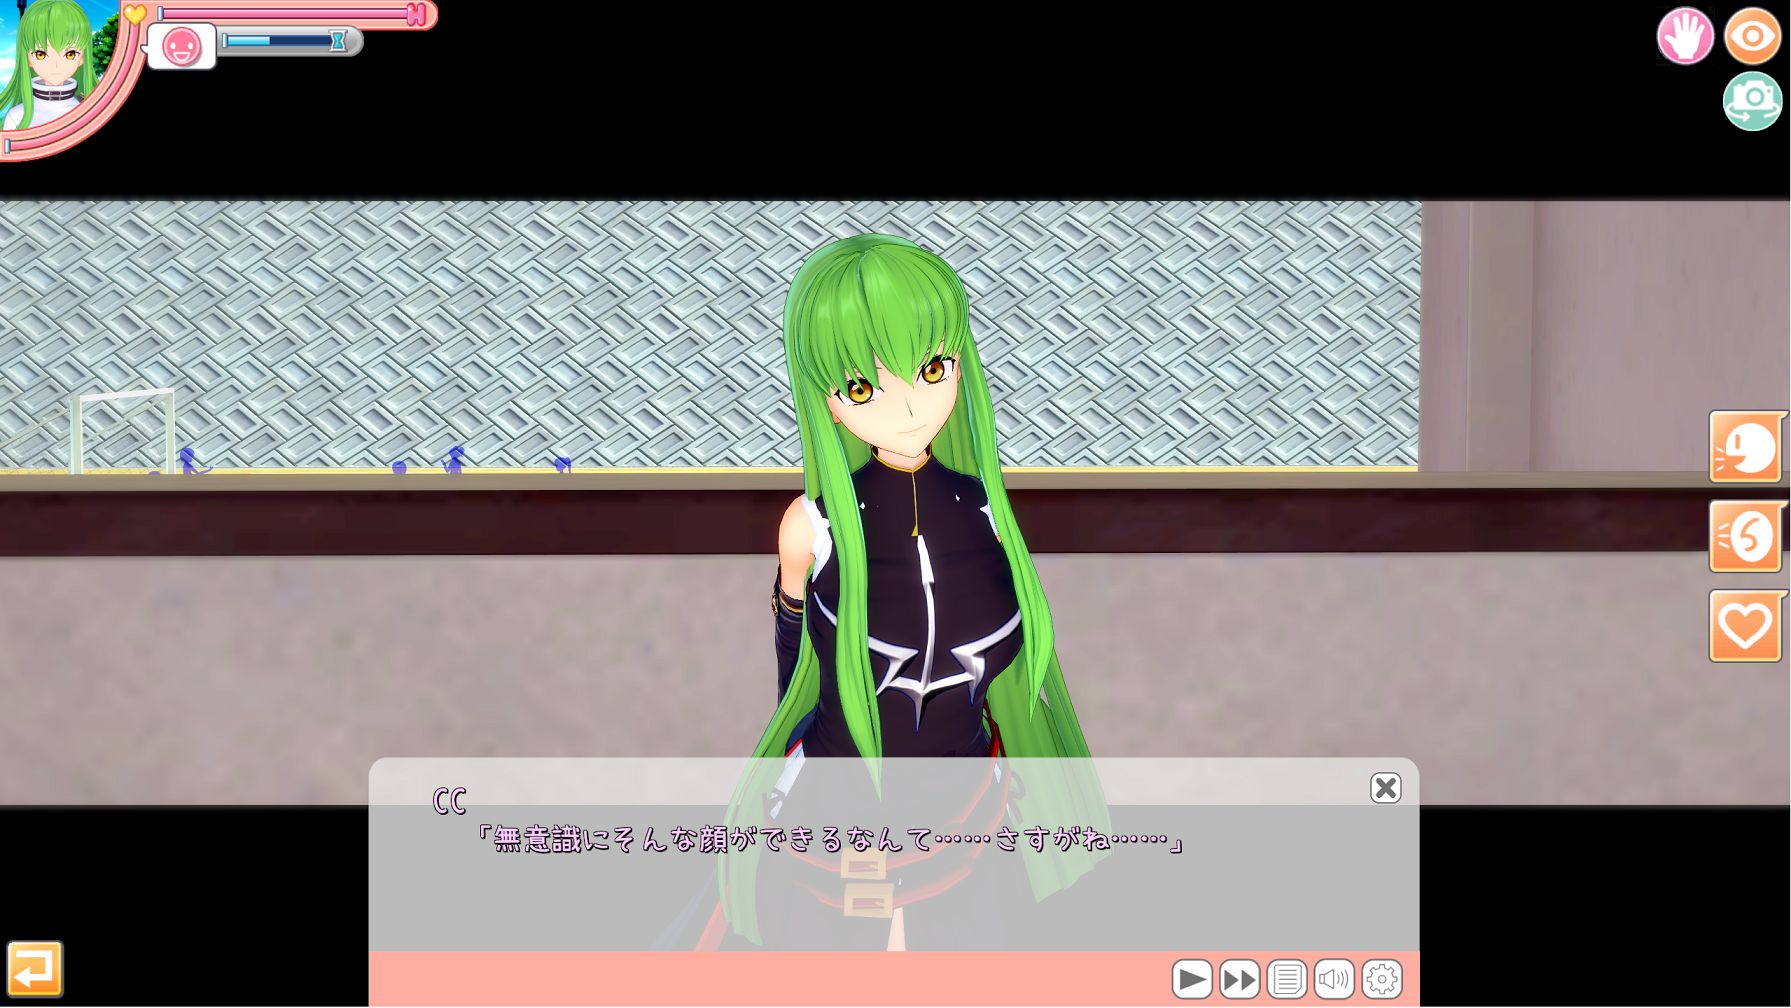 【Good news】Eroge "Koikatsu", too much fun to etch with characters of famous anime games wwwwwww 1